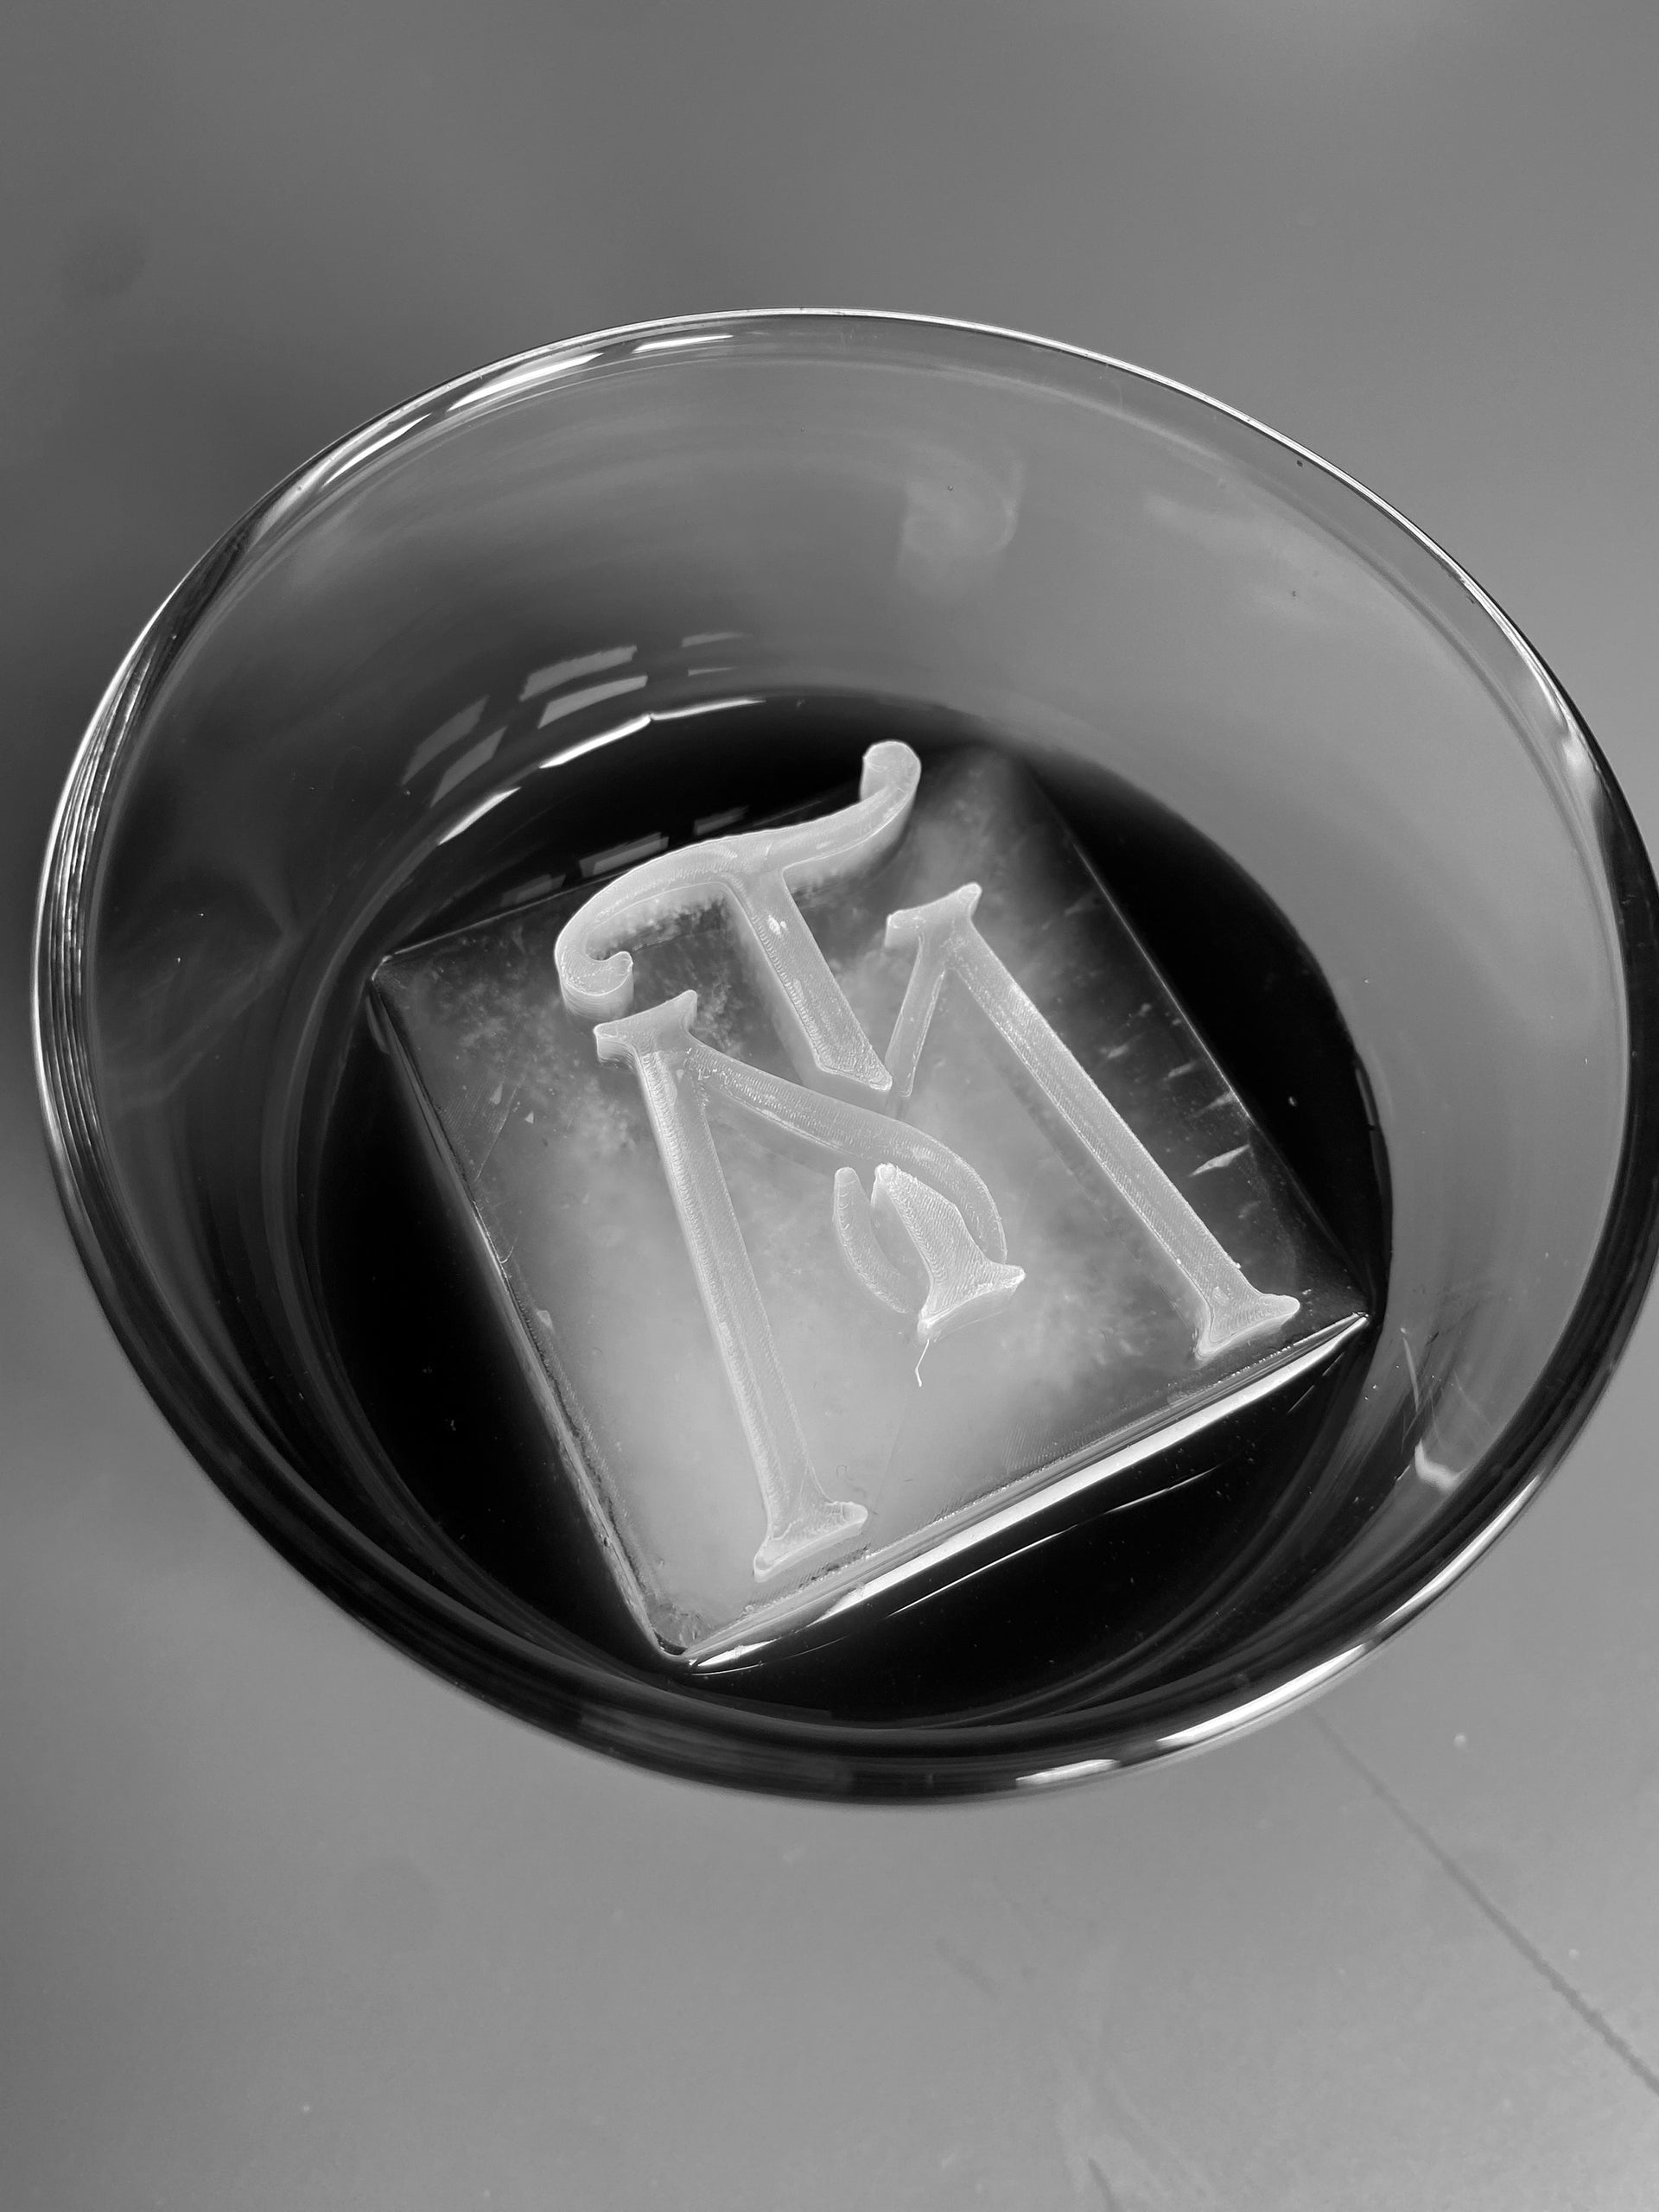 Custom Ice Molds and Trays - Honest Ice - Help provide access to water